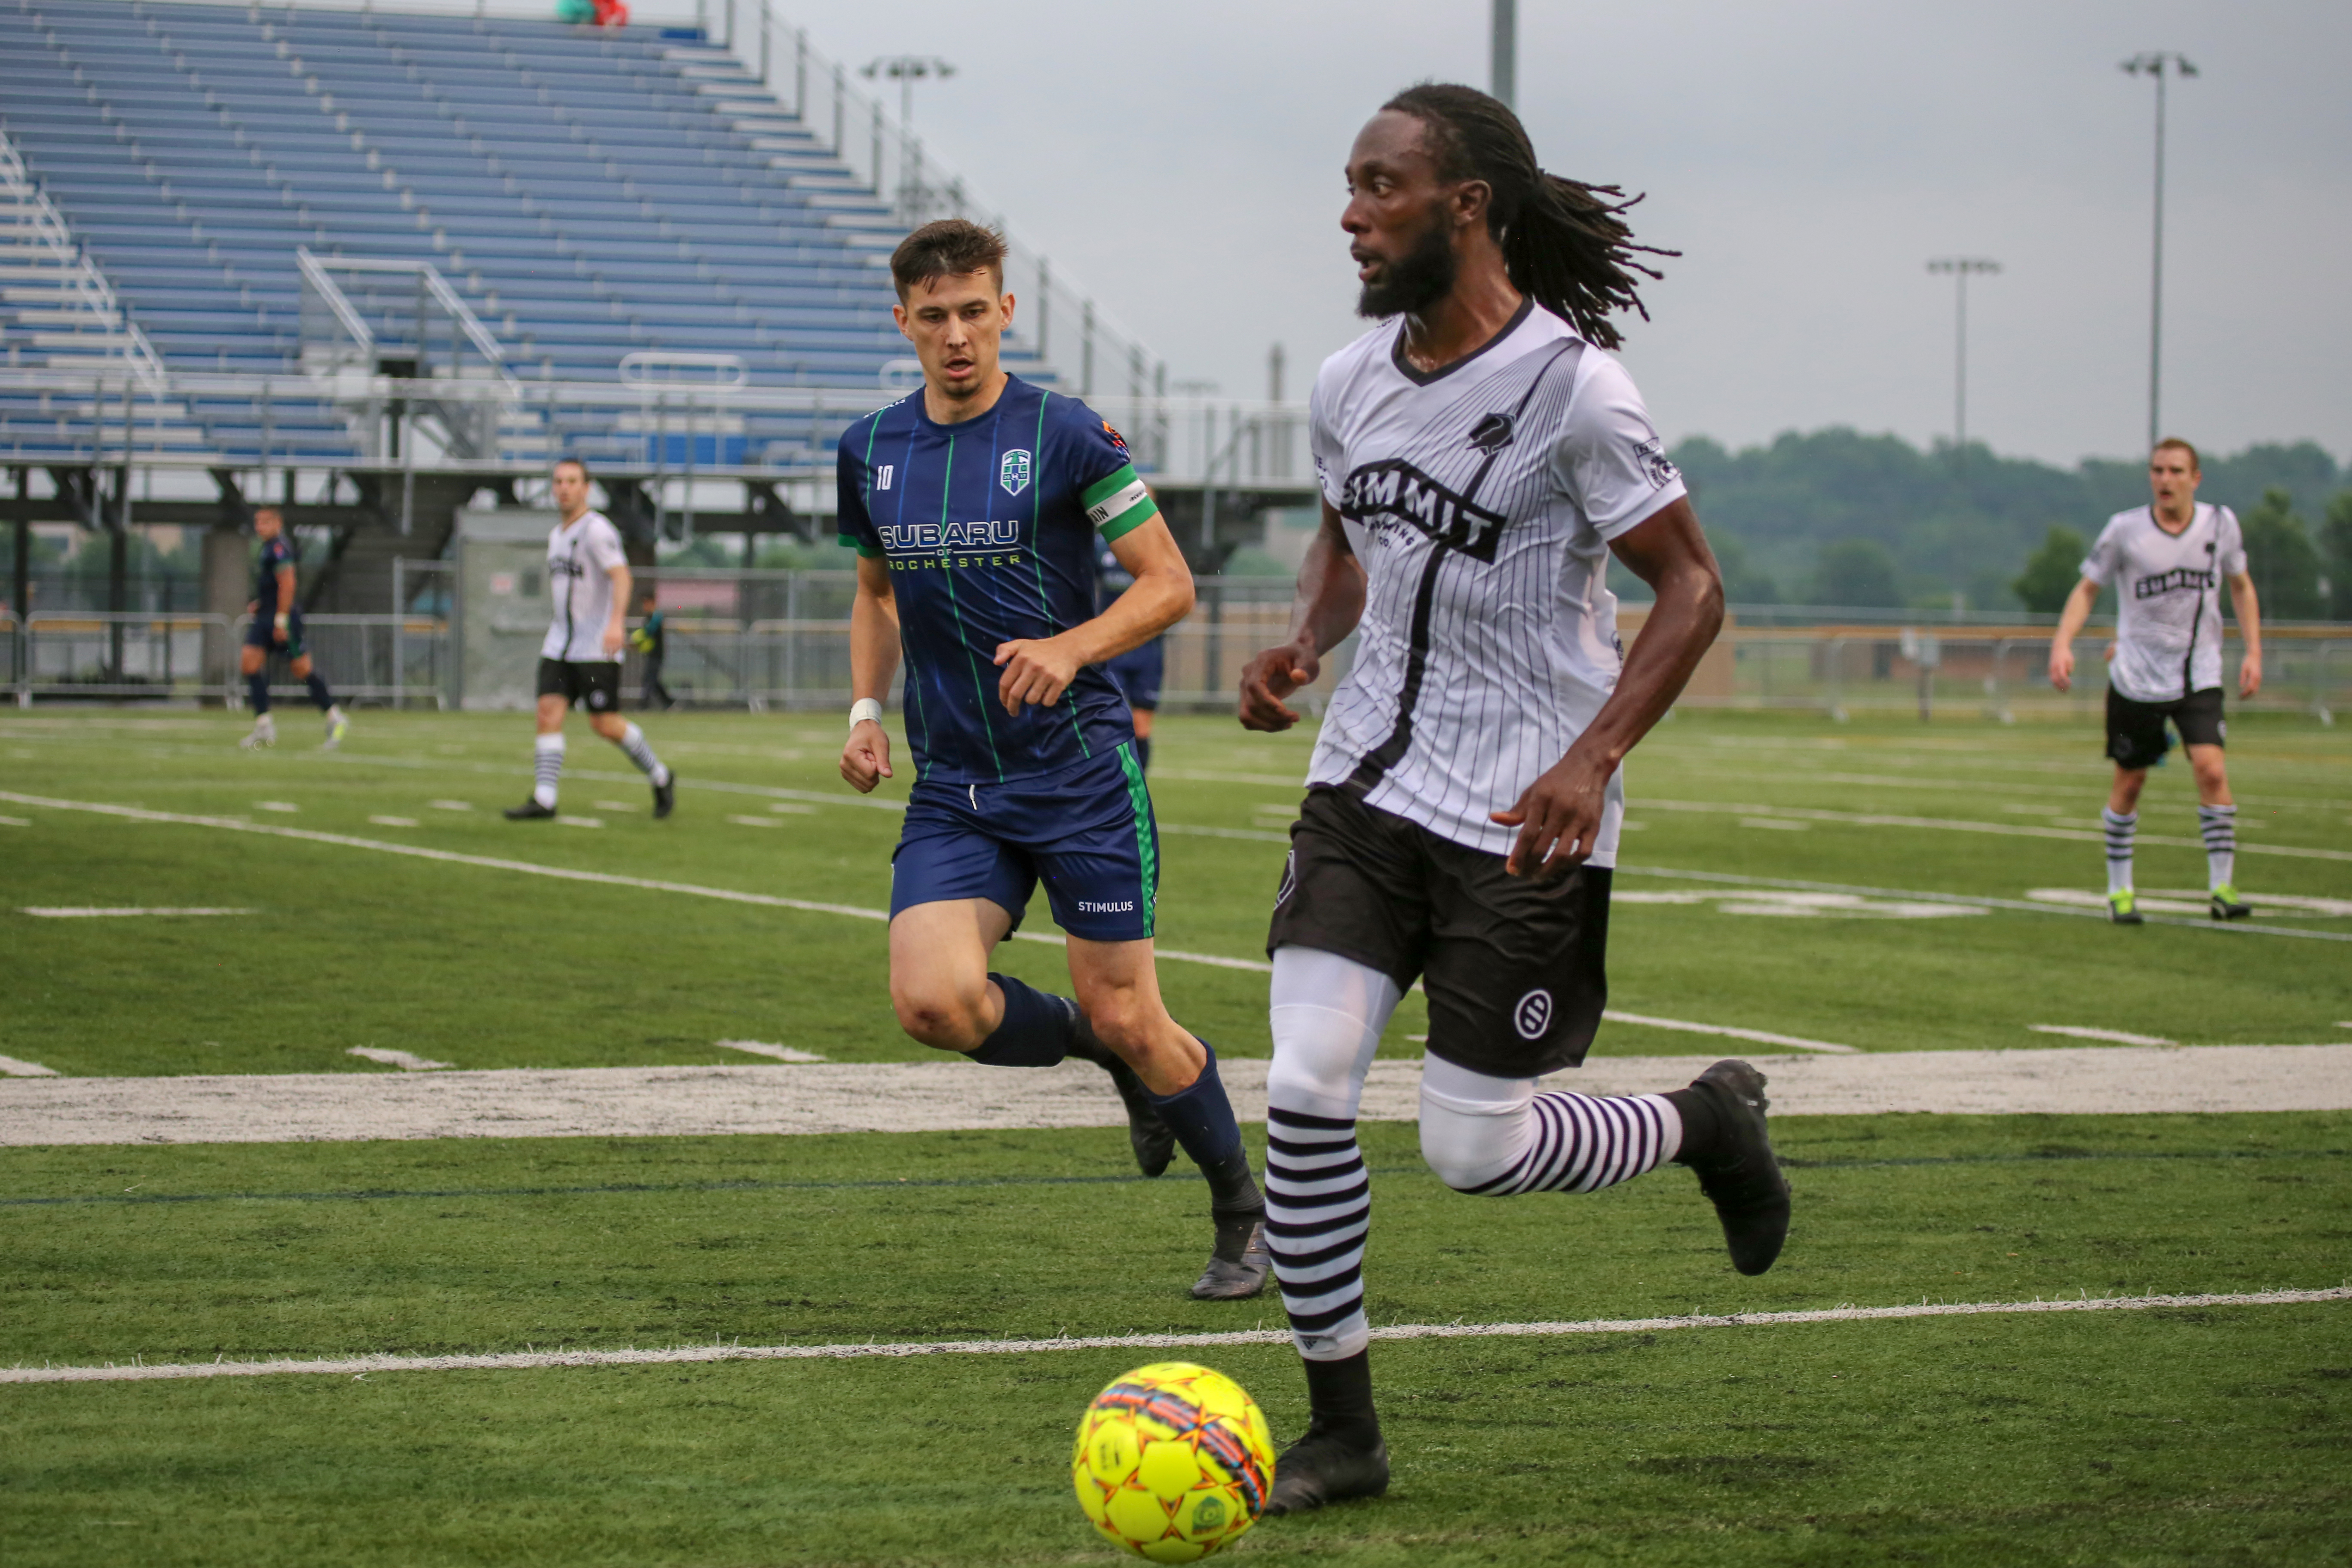 Minneapolis City Stays Perfect With Win Over Med City